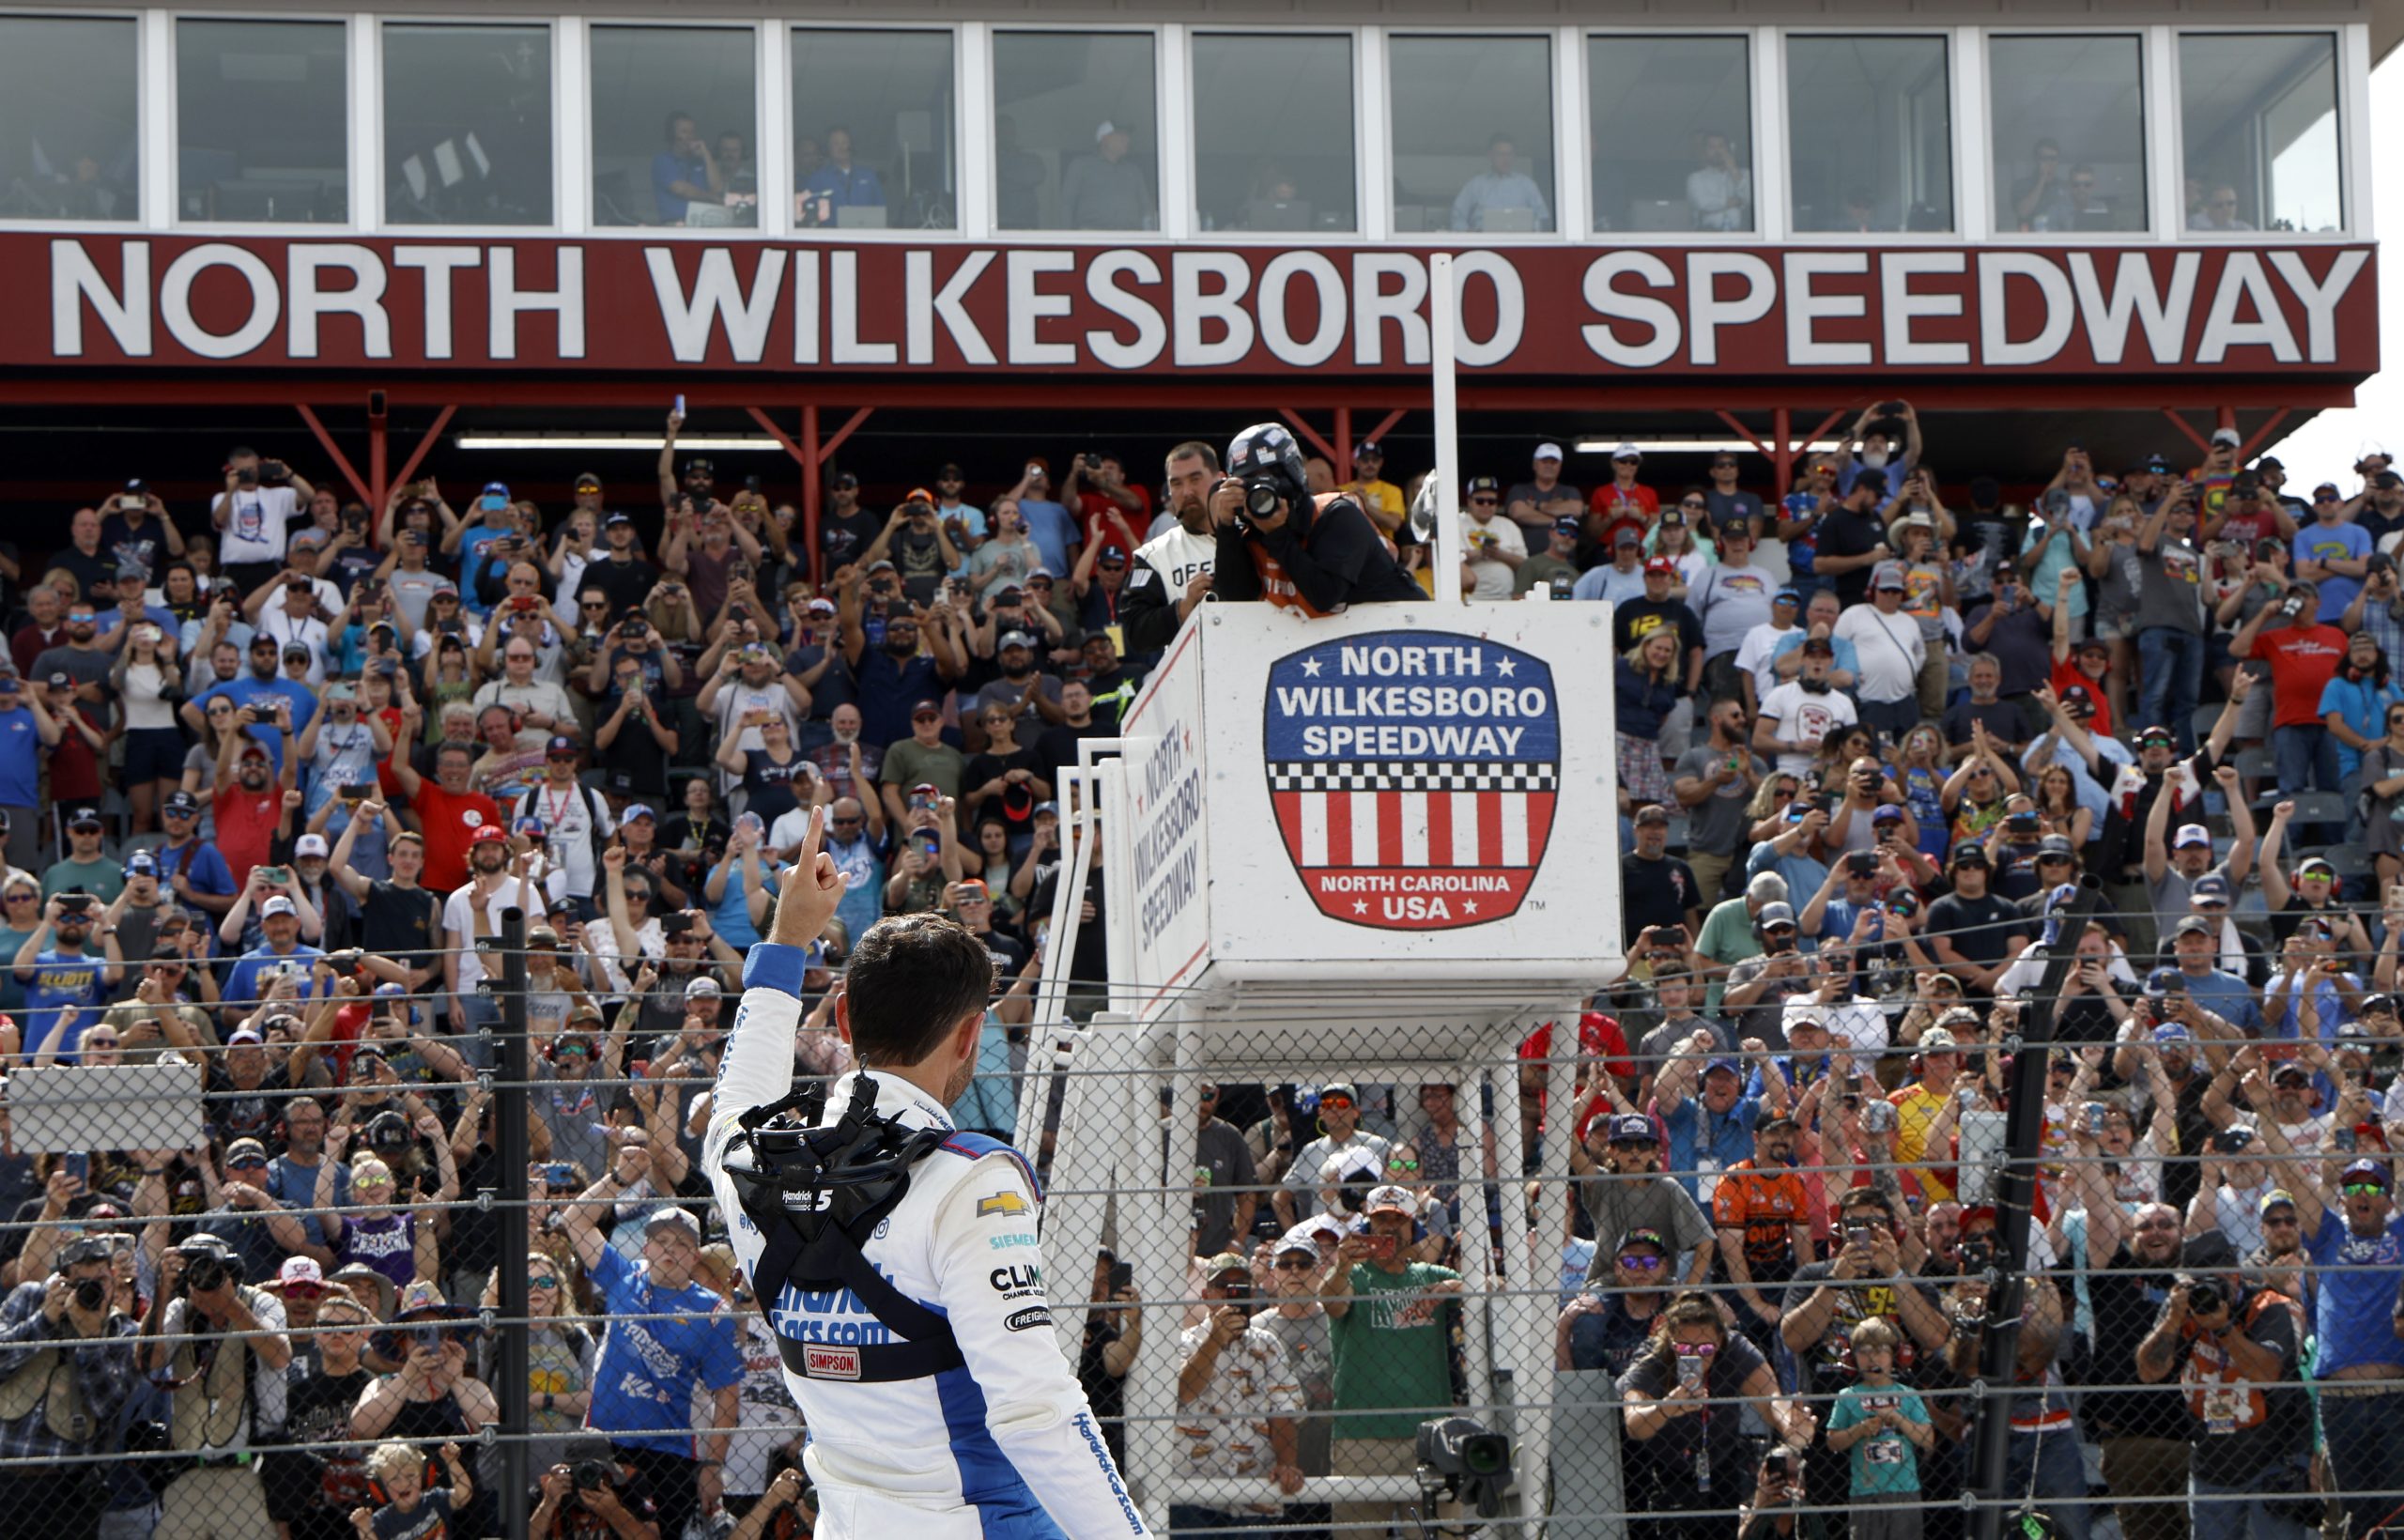 NORTH WILKESBORO, NORTH CAROLINA - MAY 20: Kyle Larson, driver of the #7 HendrickCars.com Chevrolet, celebrates after winning the NASCAR Craftsman Truck Series Tyson 250 at North Wilkesboro Speedway on May 20, 2023 in North Wilkesboro, North Carolina. (Photo by Chris Graythen/Getty Images)